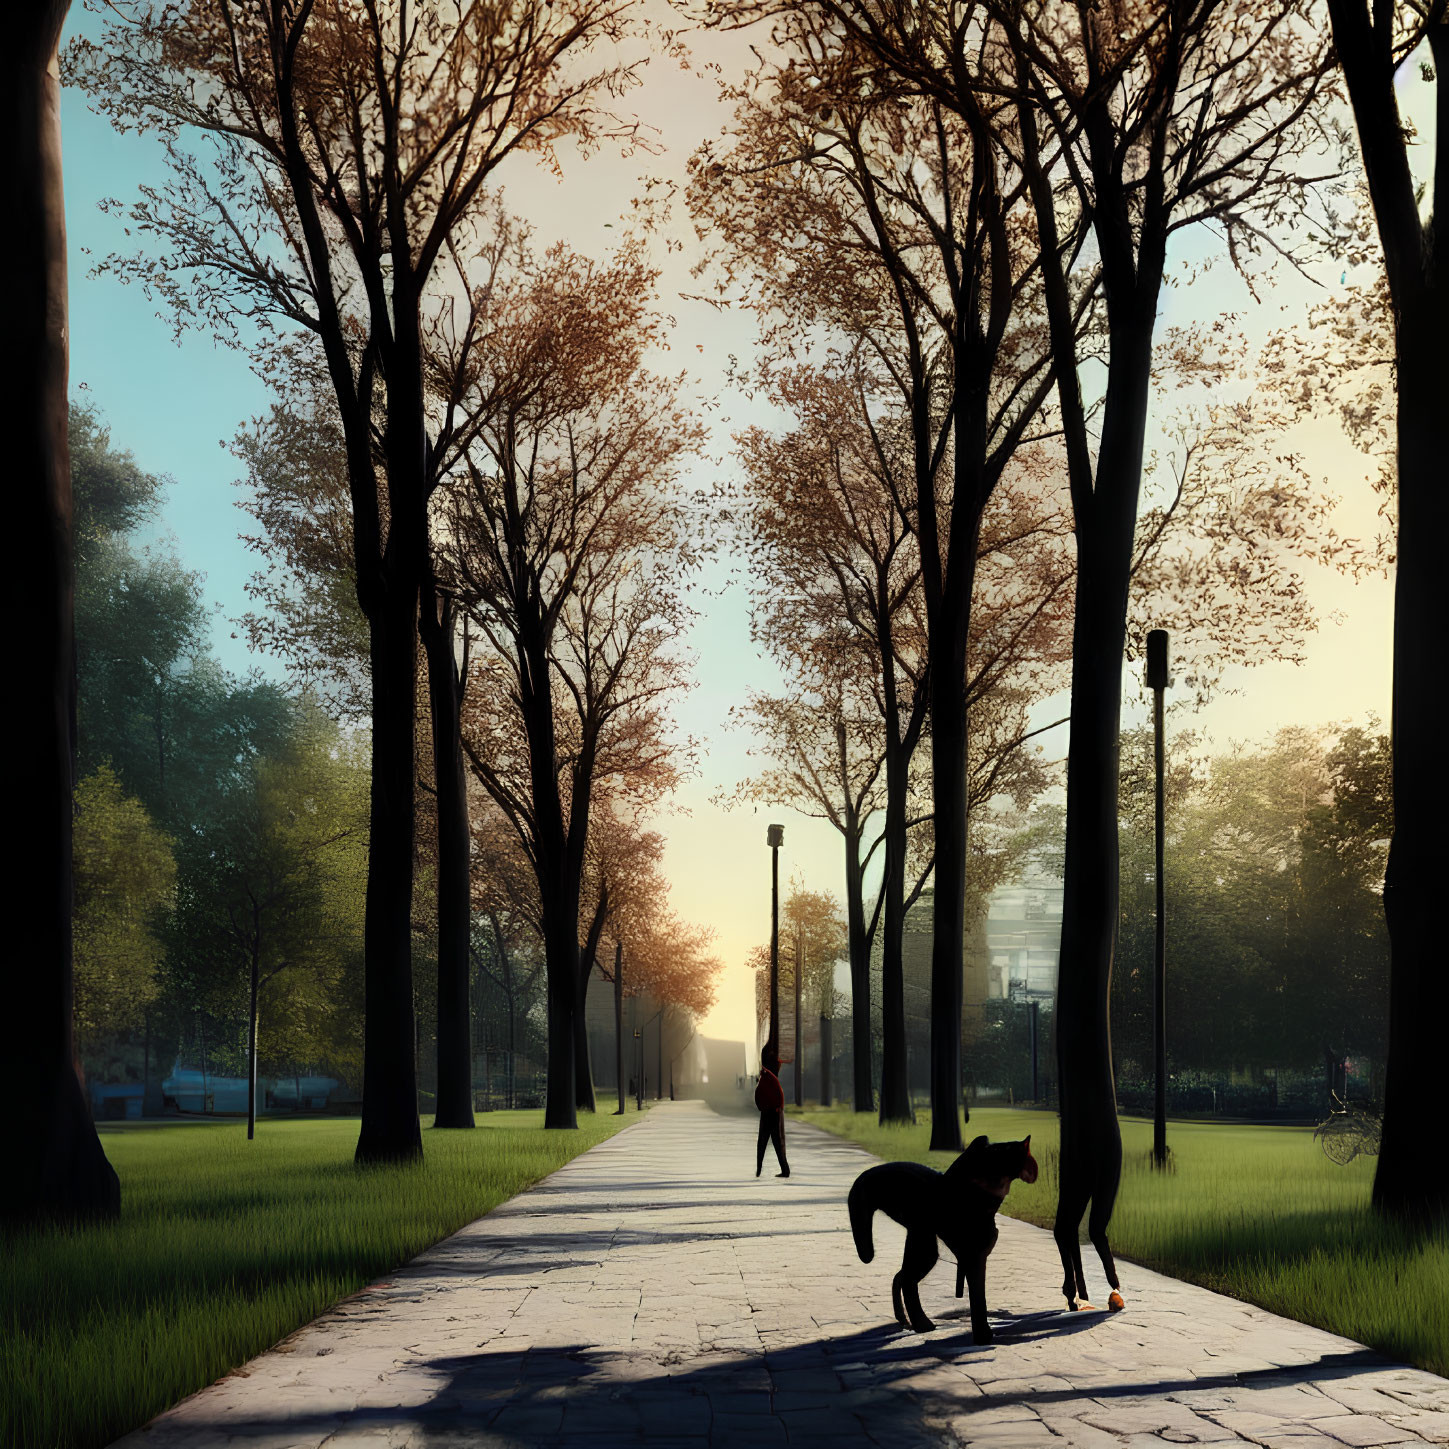 Tranquil park scene with sunset, tall trees, walking dog, and distant cyclist